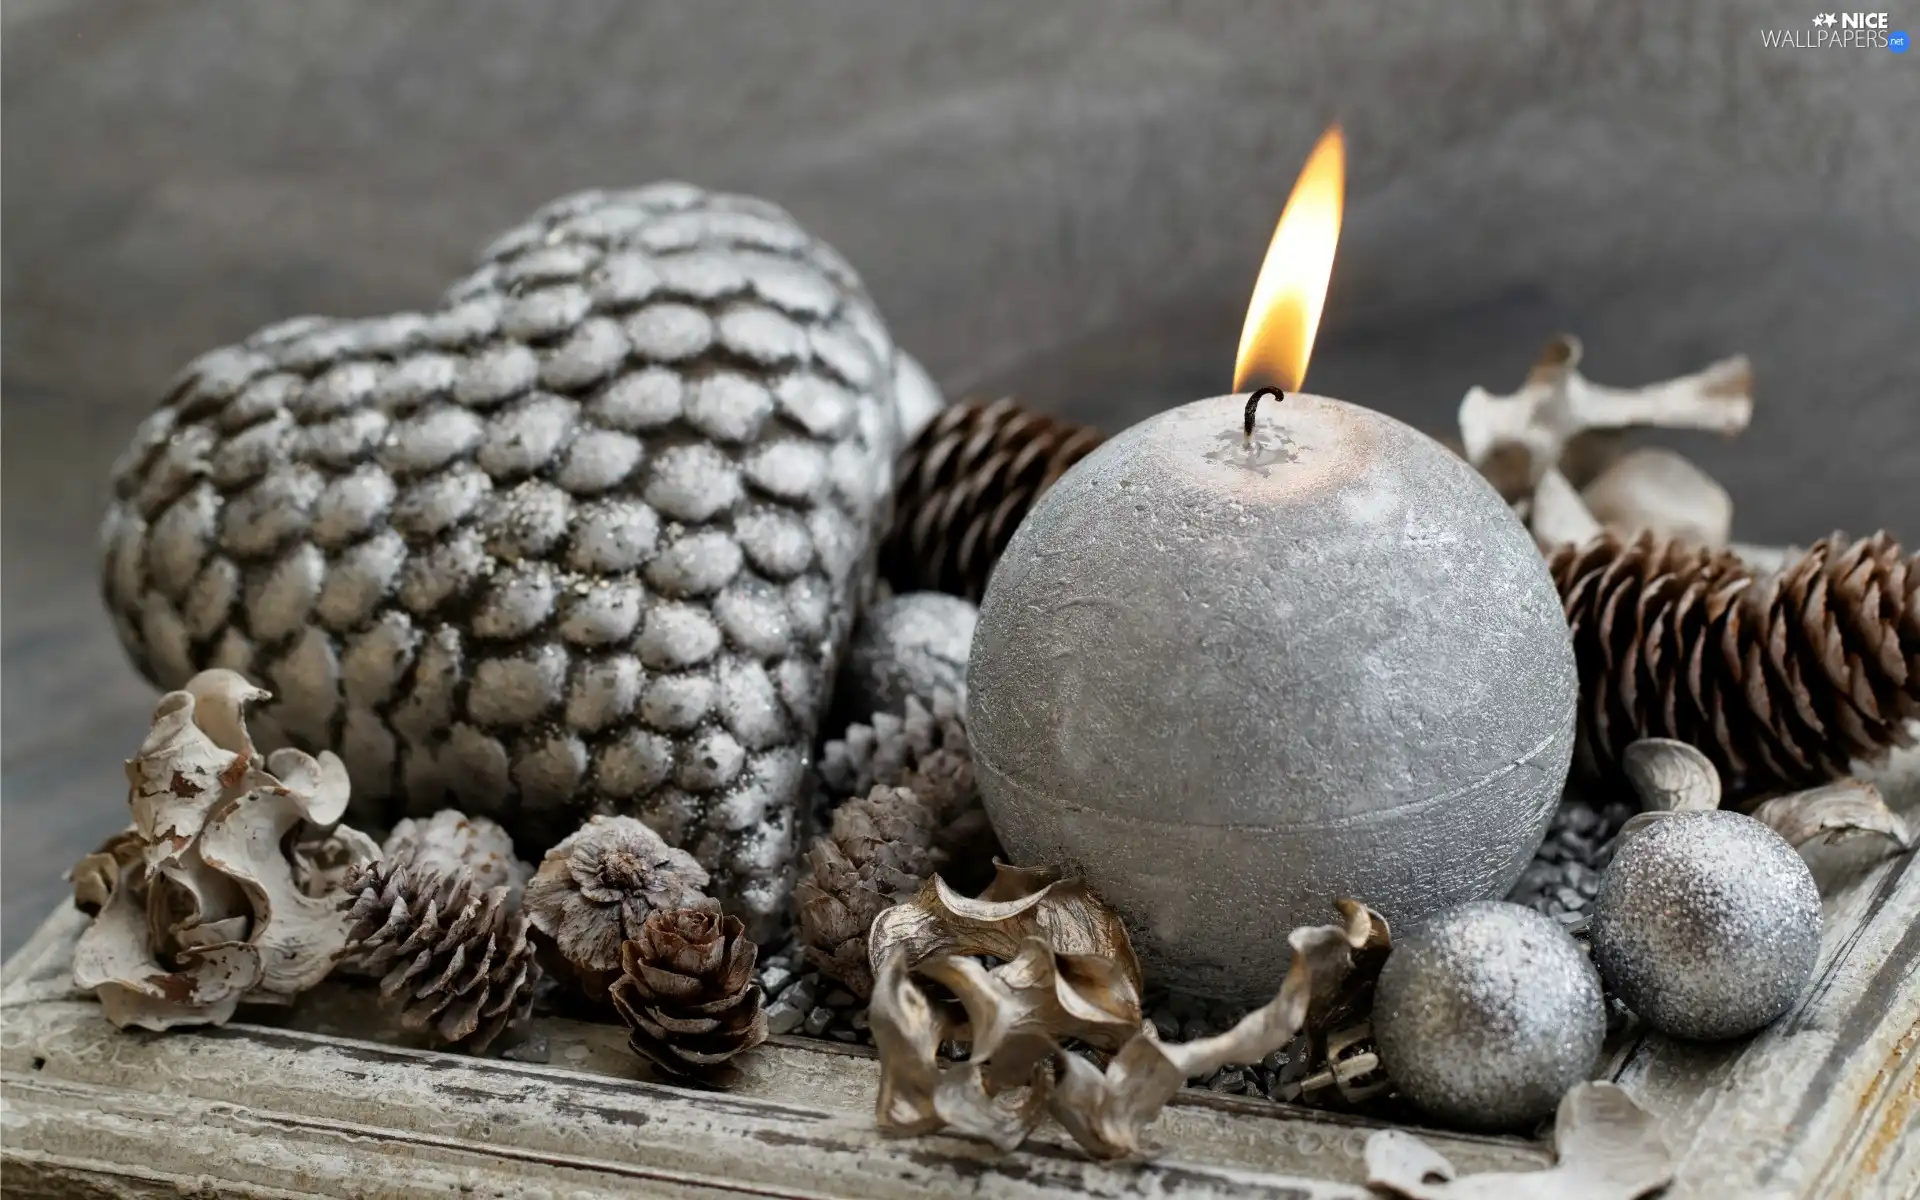 Heart, cones, Christmas, candle, decoration